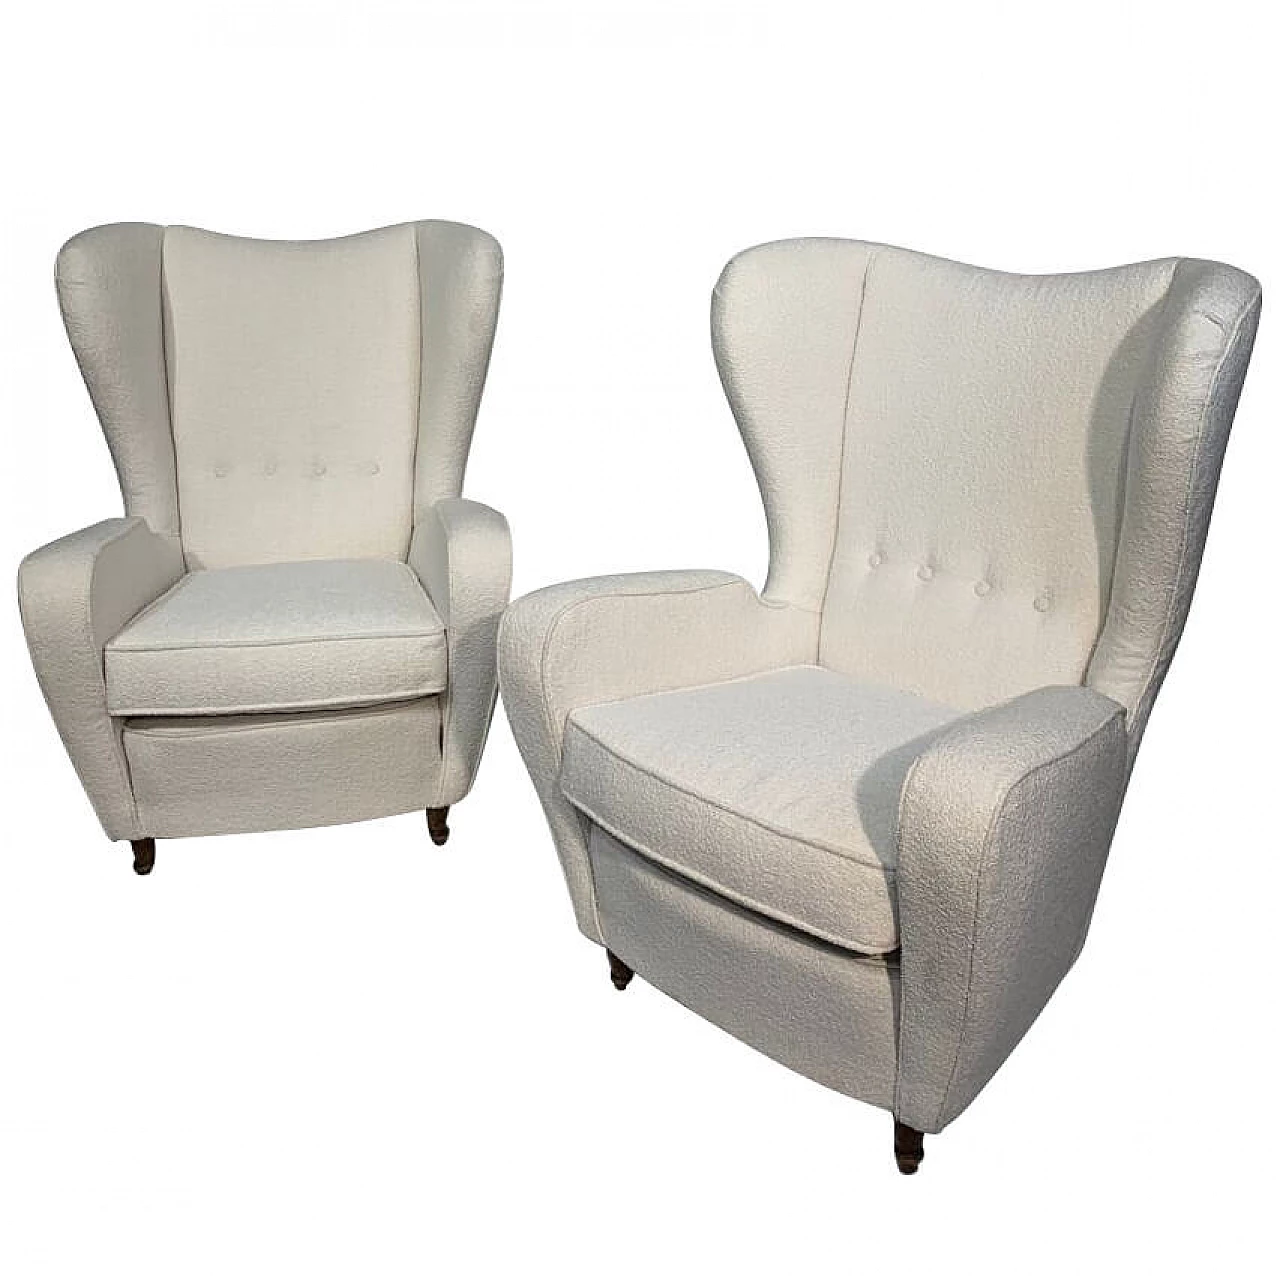 Pair of armchairs with bouclè fabric, 1950s 1230548